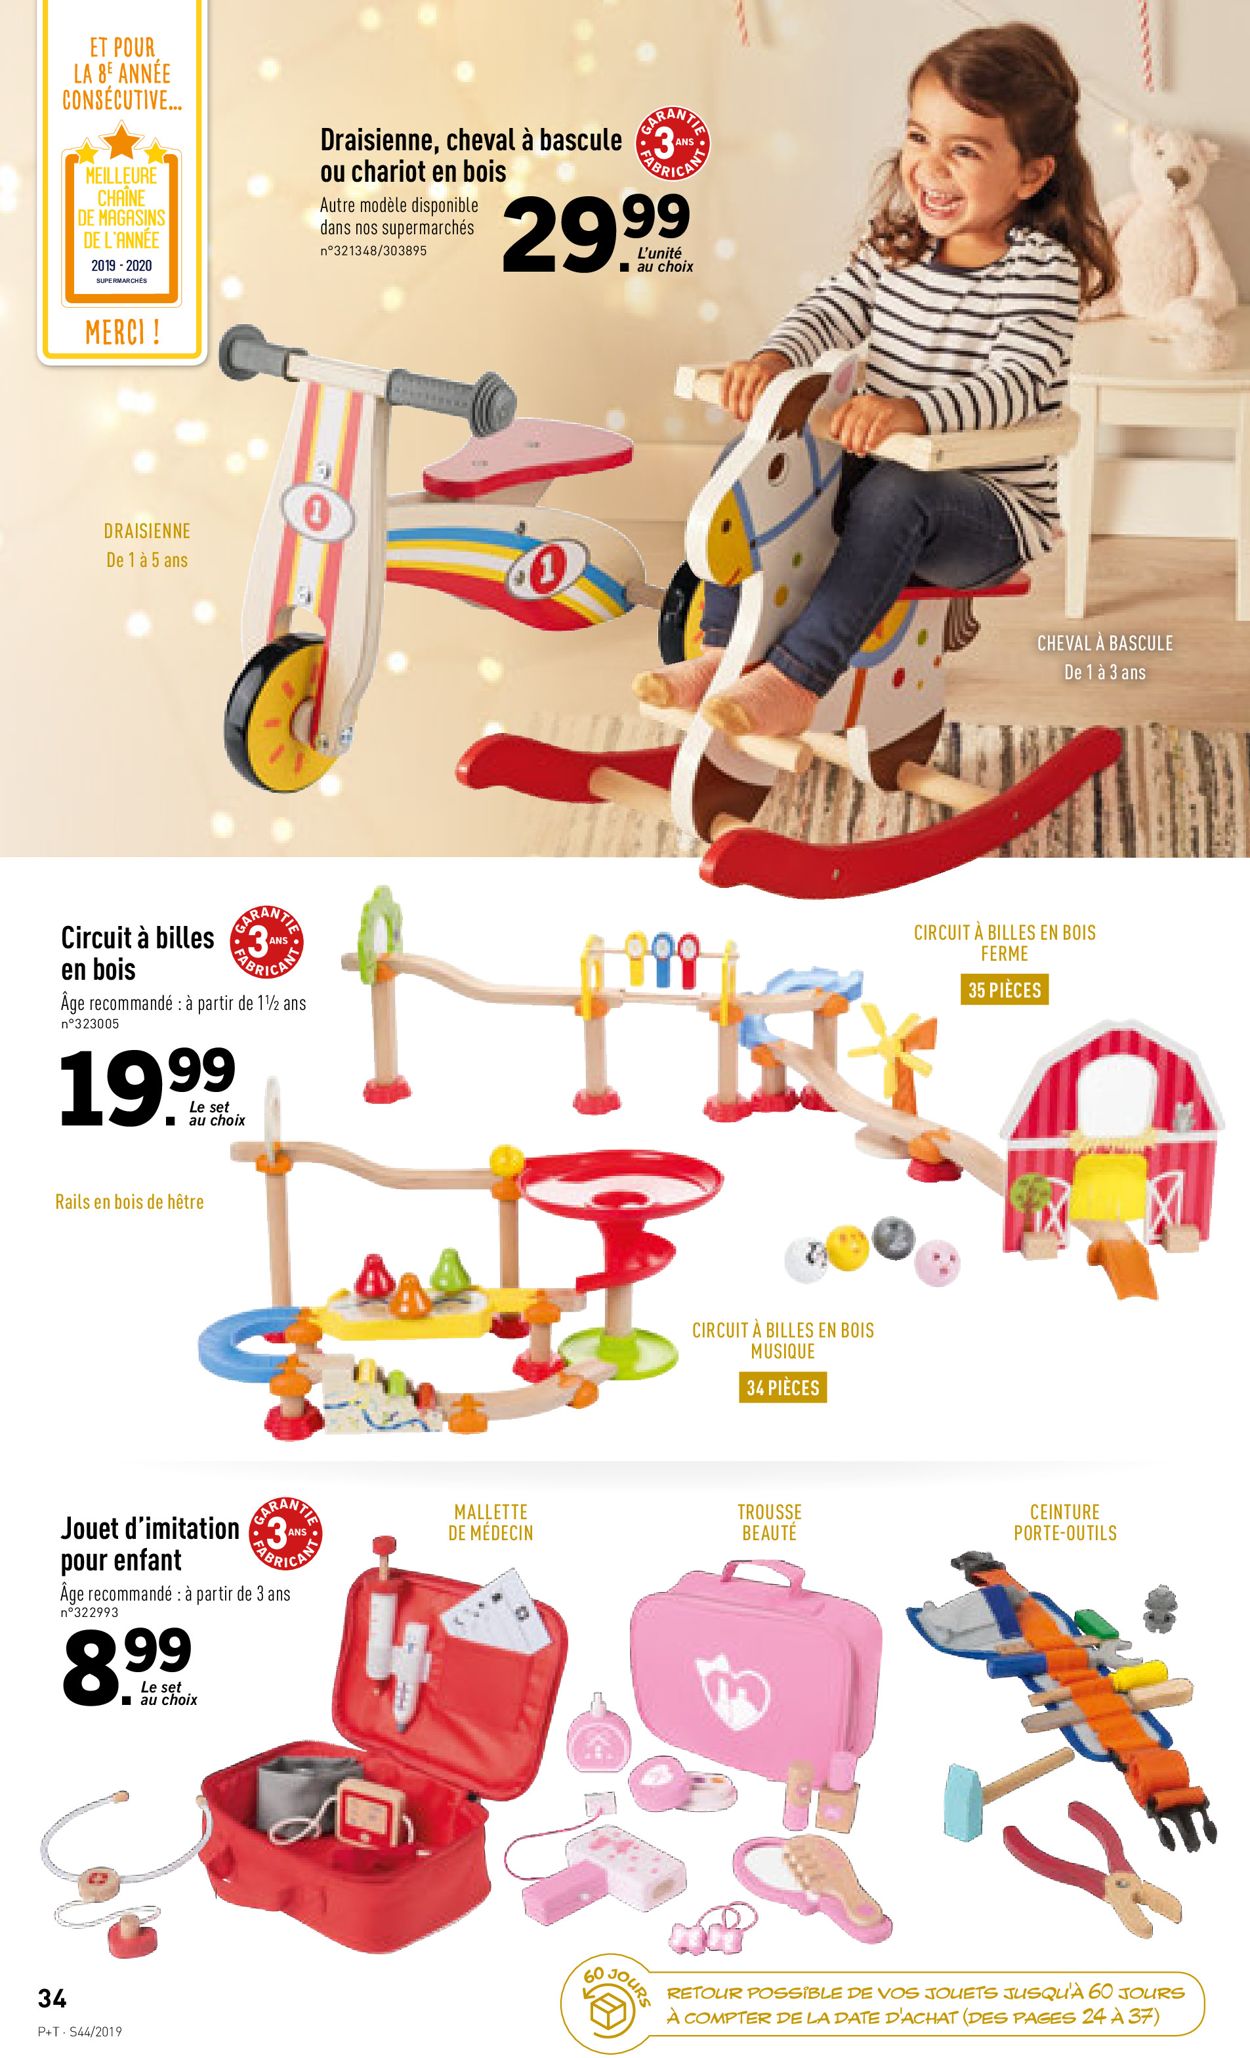 victory two Sturdy Lidl Catalogue actuel 30.10 - 05.11.2019 [34]